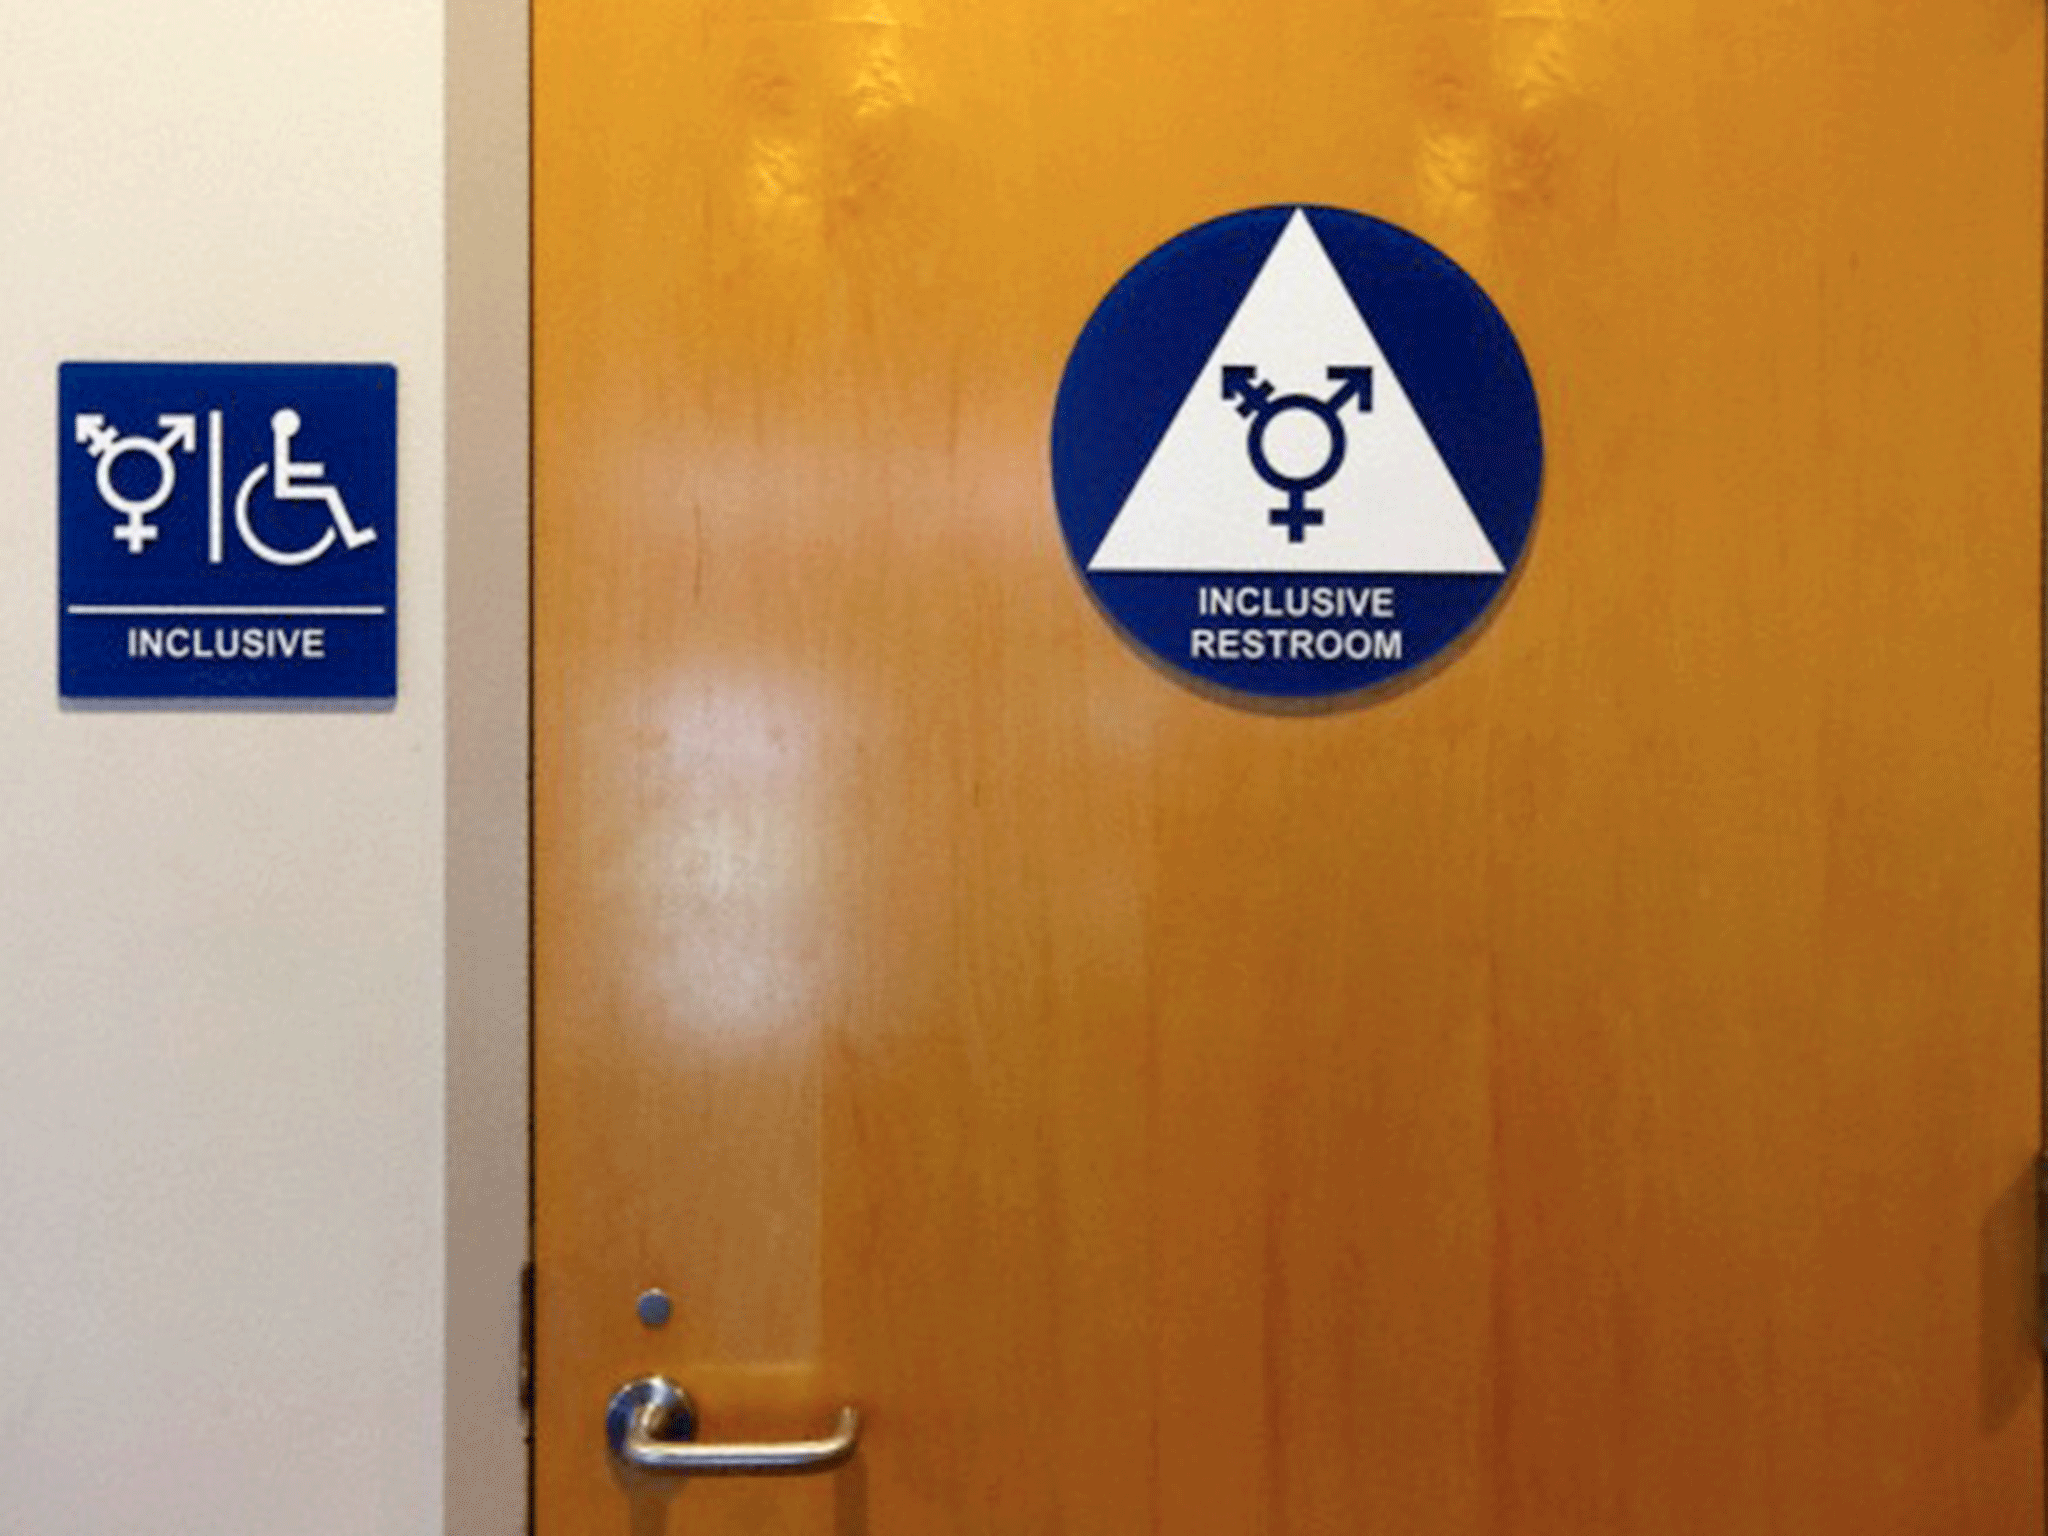 Primary schools in Glasgow to have gender neutral toilets